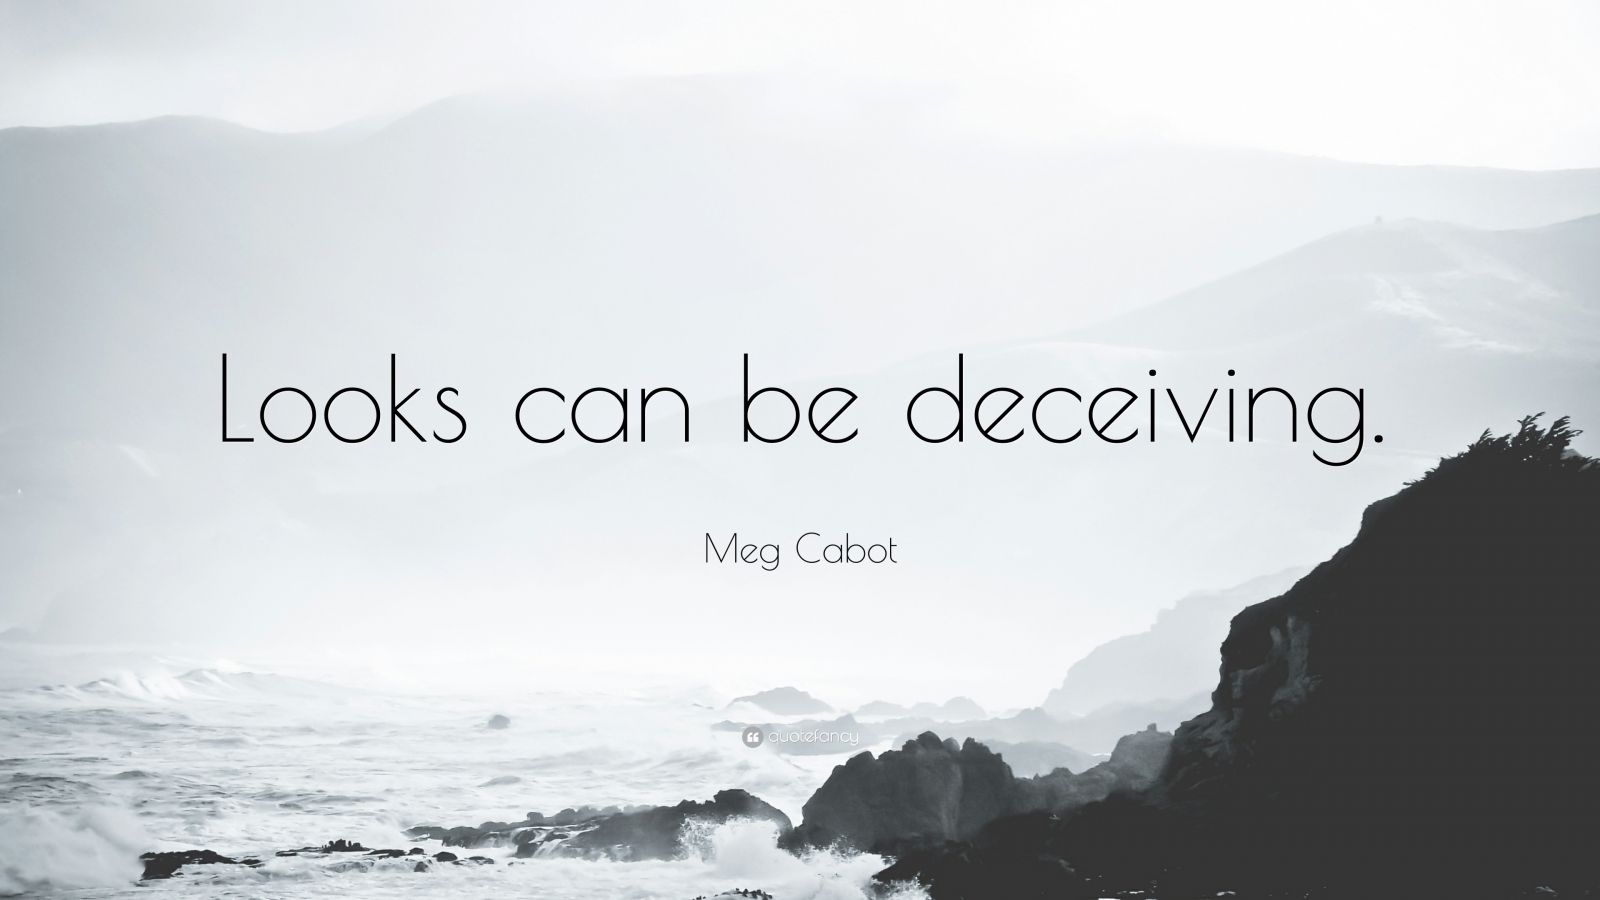 Meg Cabot Quote “Looks can be deceiving.” (7 wallpapers) Quotefancy